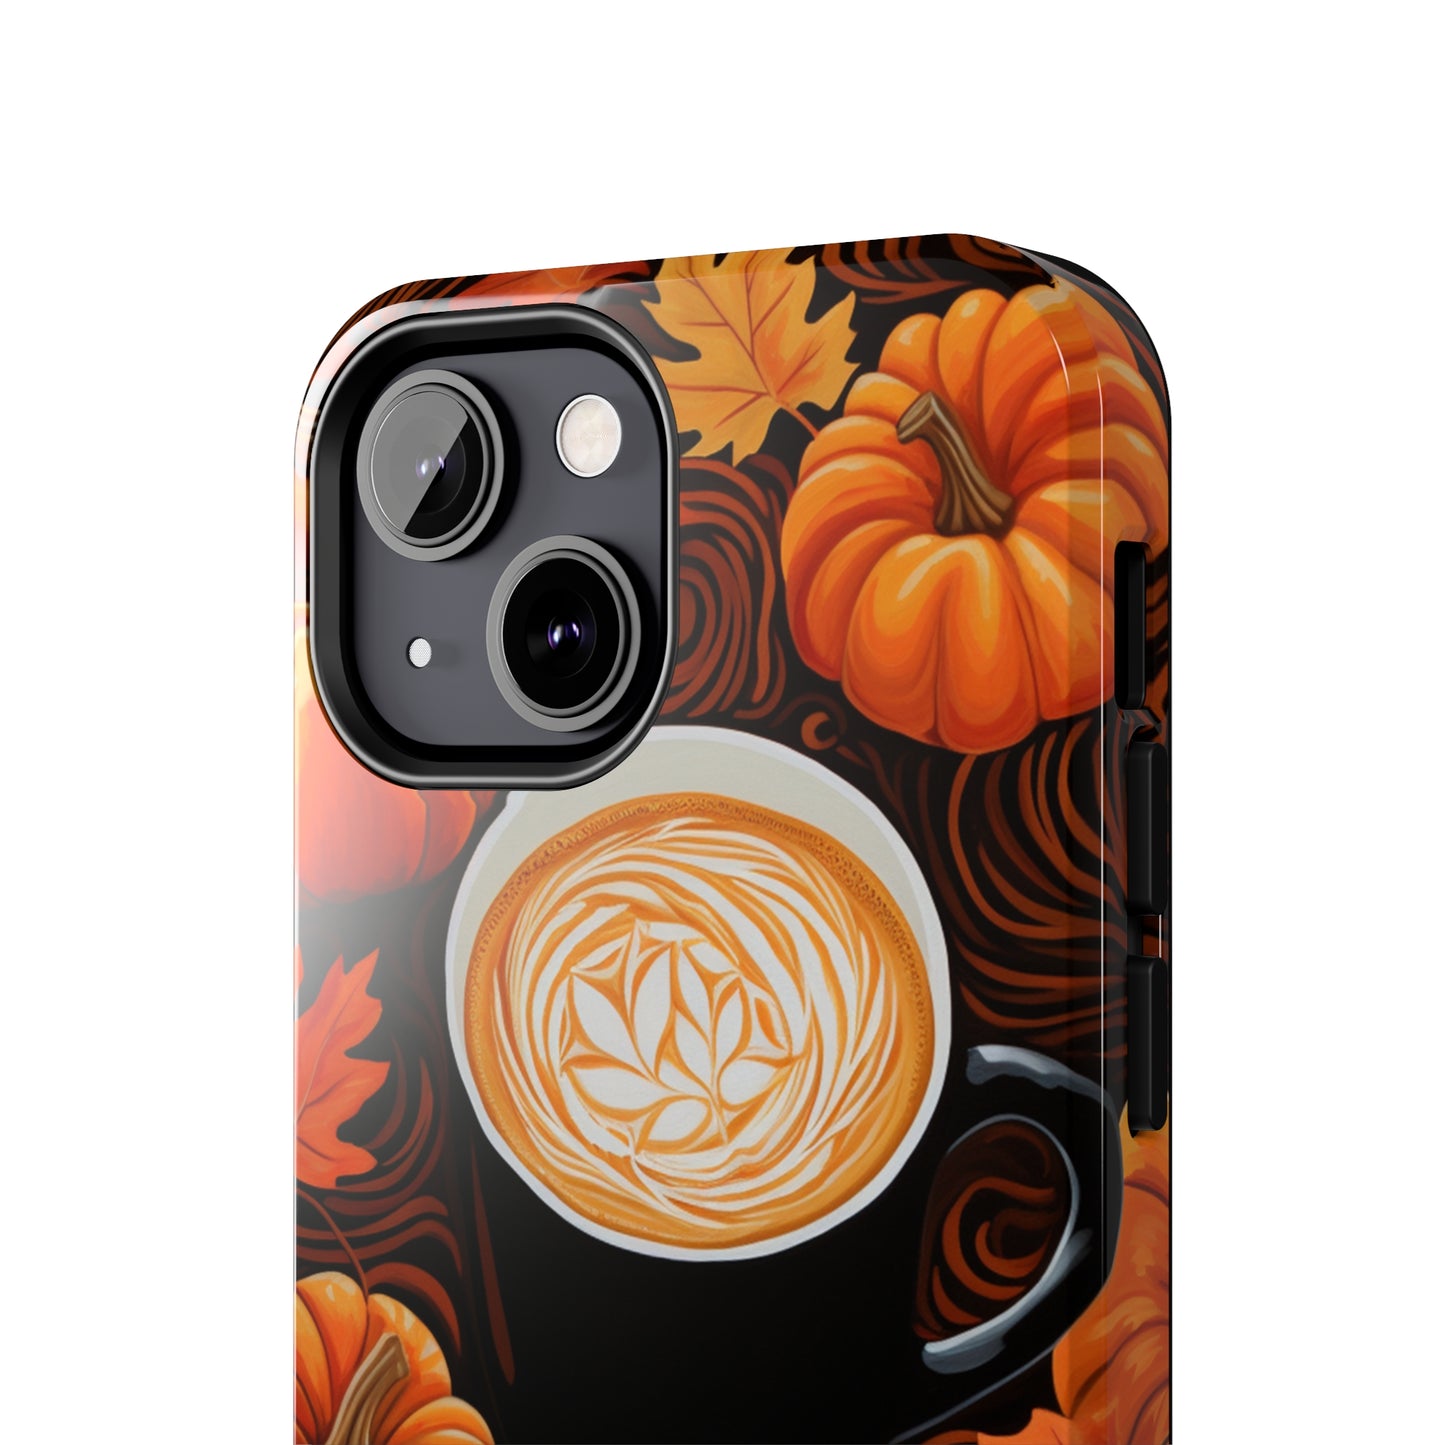 Autumn Aesthetic Fall Colors iPhone Case